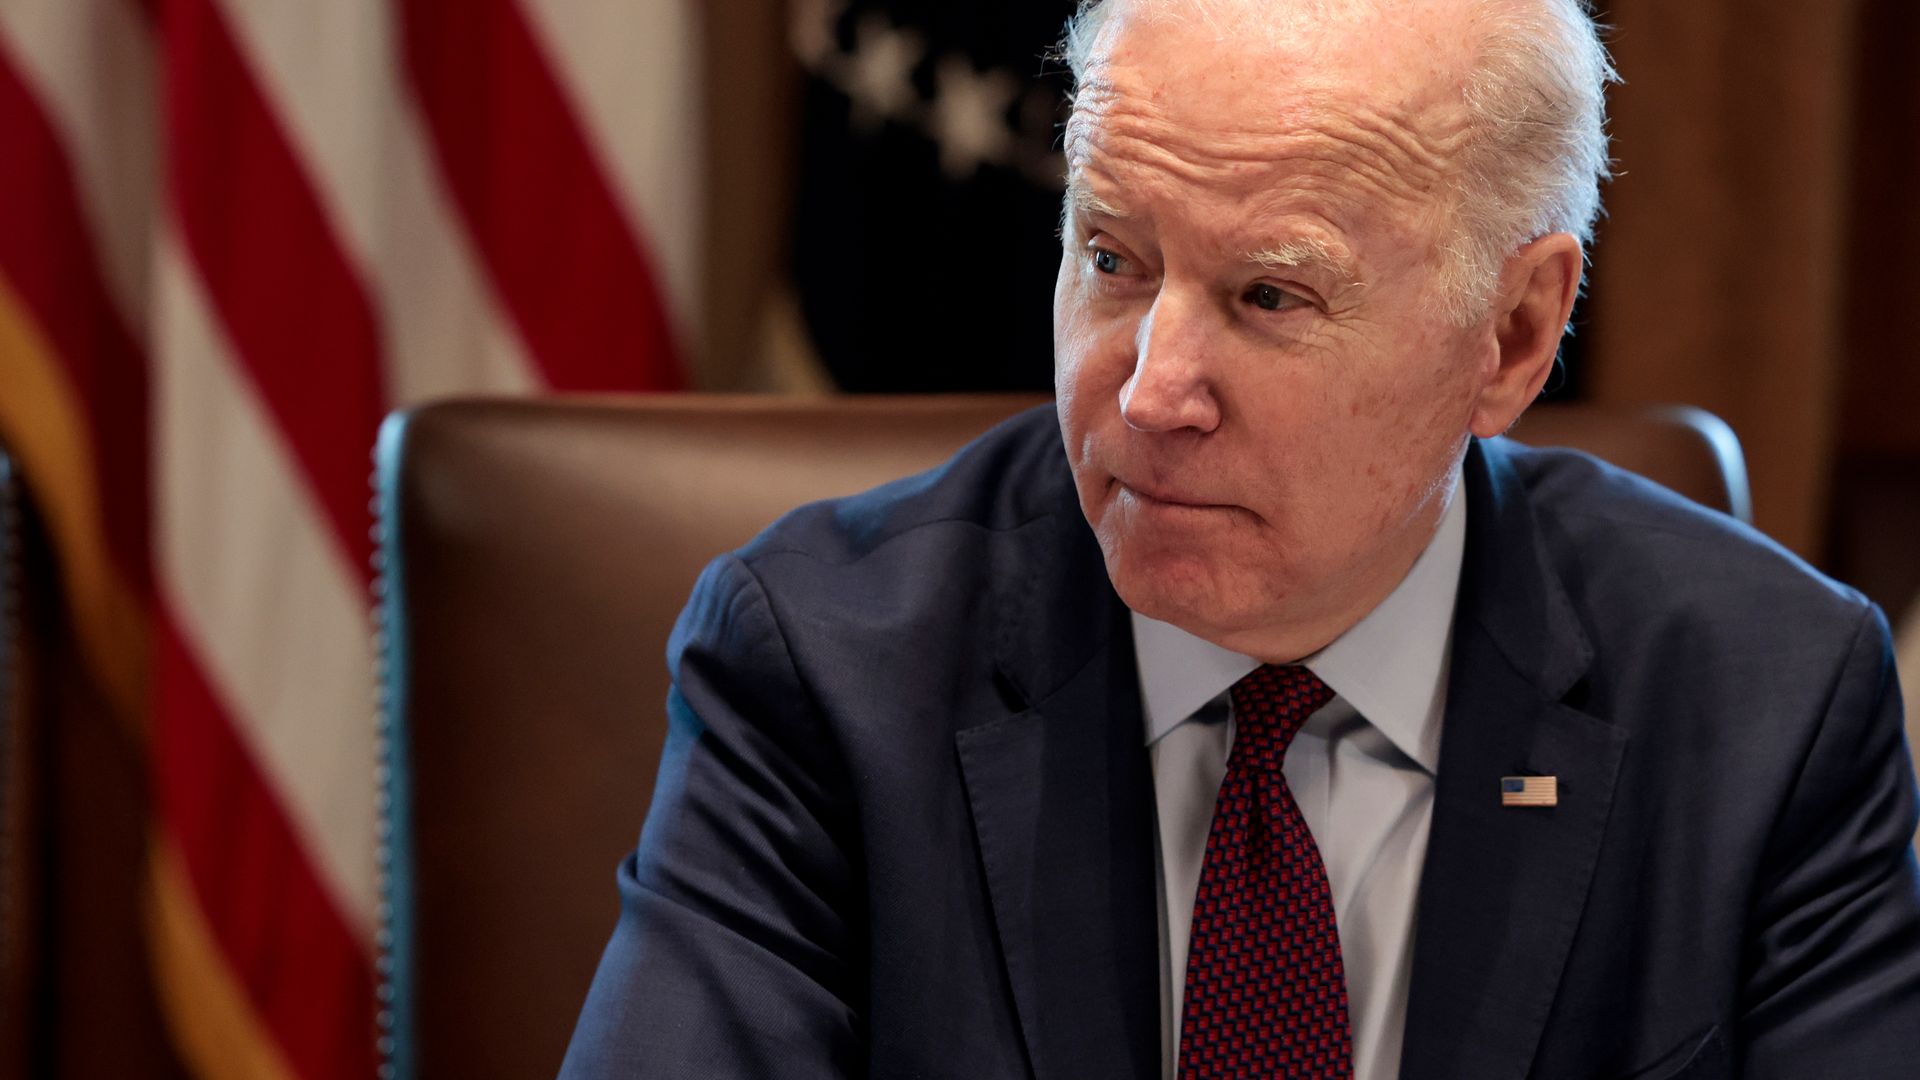 Biden and the Democrats are causing major problems for the country and will pay a steep price in the 2024 presidential election.